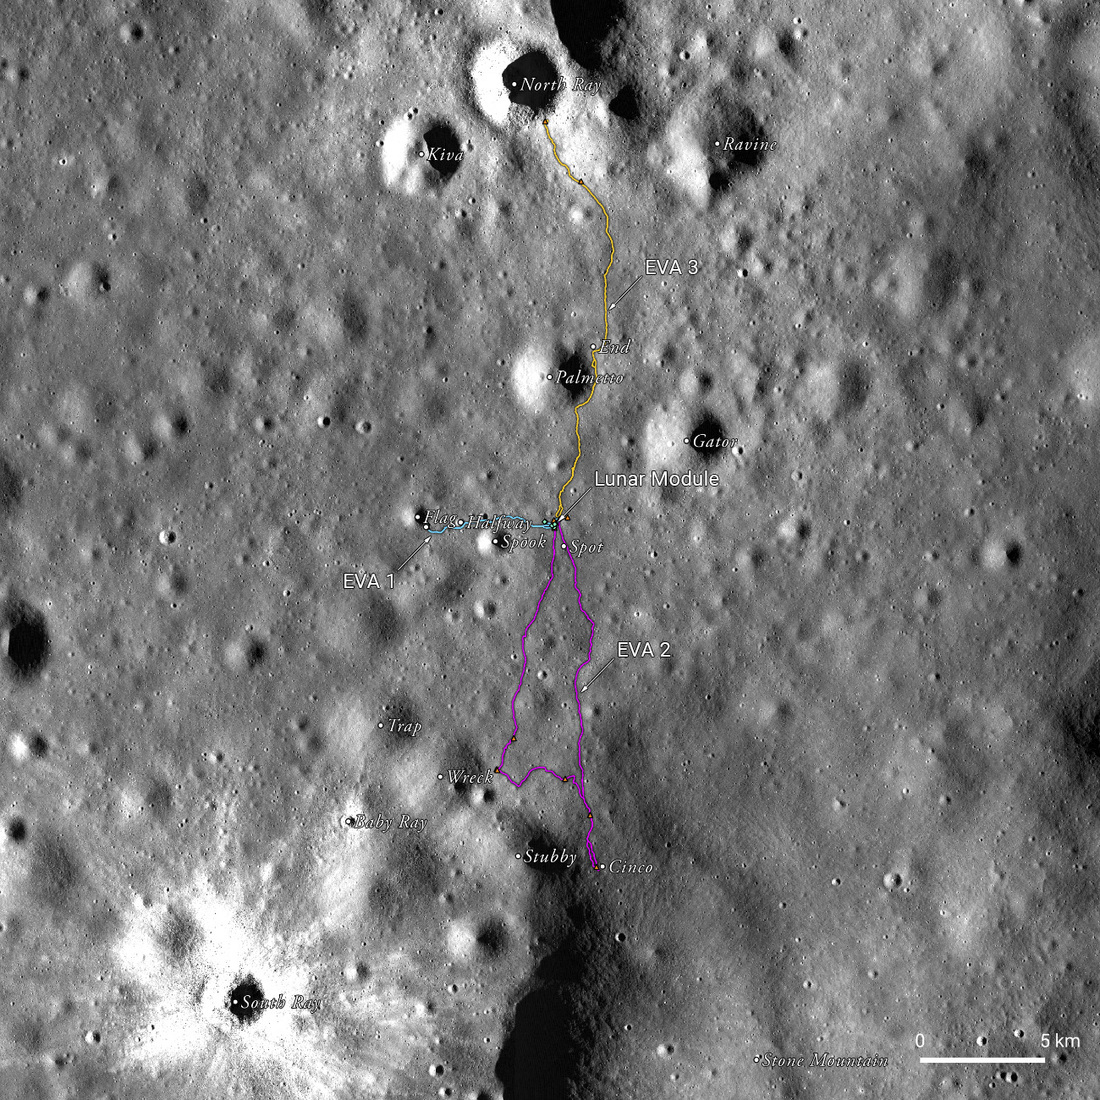 Nadir view of the Apollo 16 Landing site with labeled anthropogenic features and nearby lunar feature nomenclature.